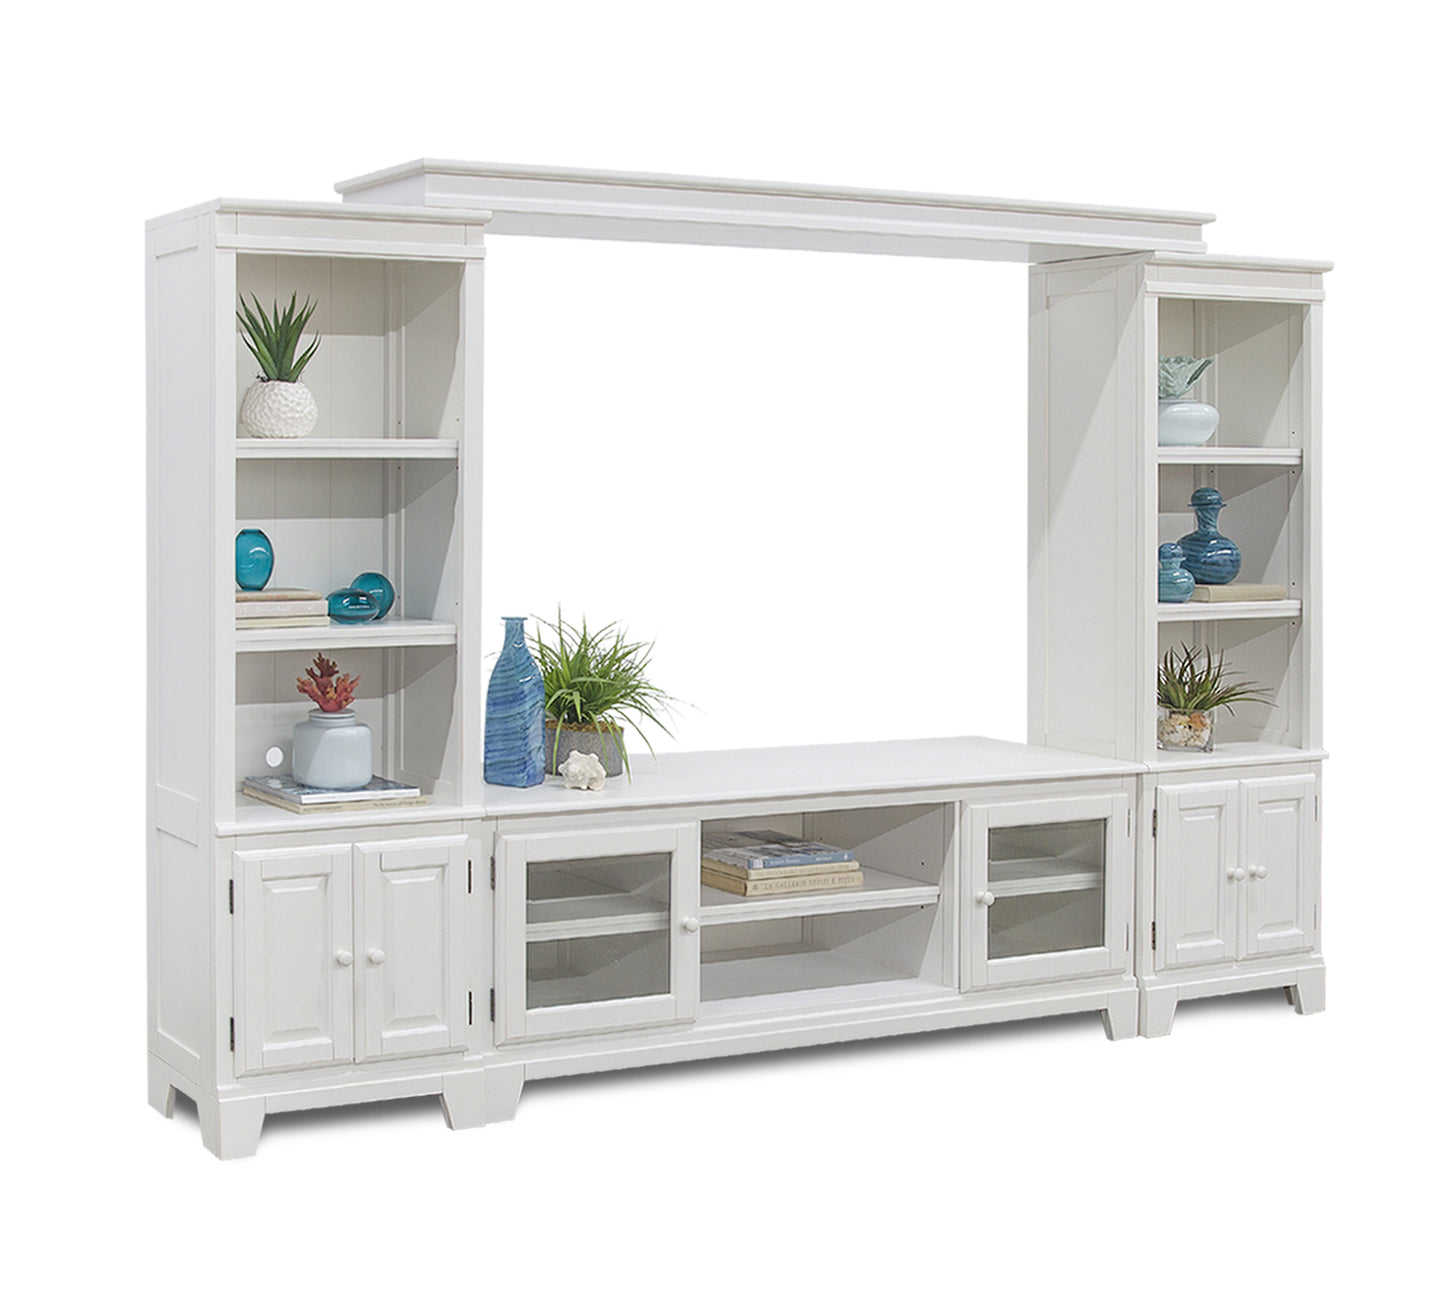 Crescent Bay II 4 Piece Wall Unit with 58" TV Console